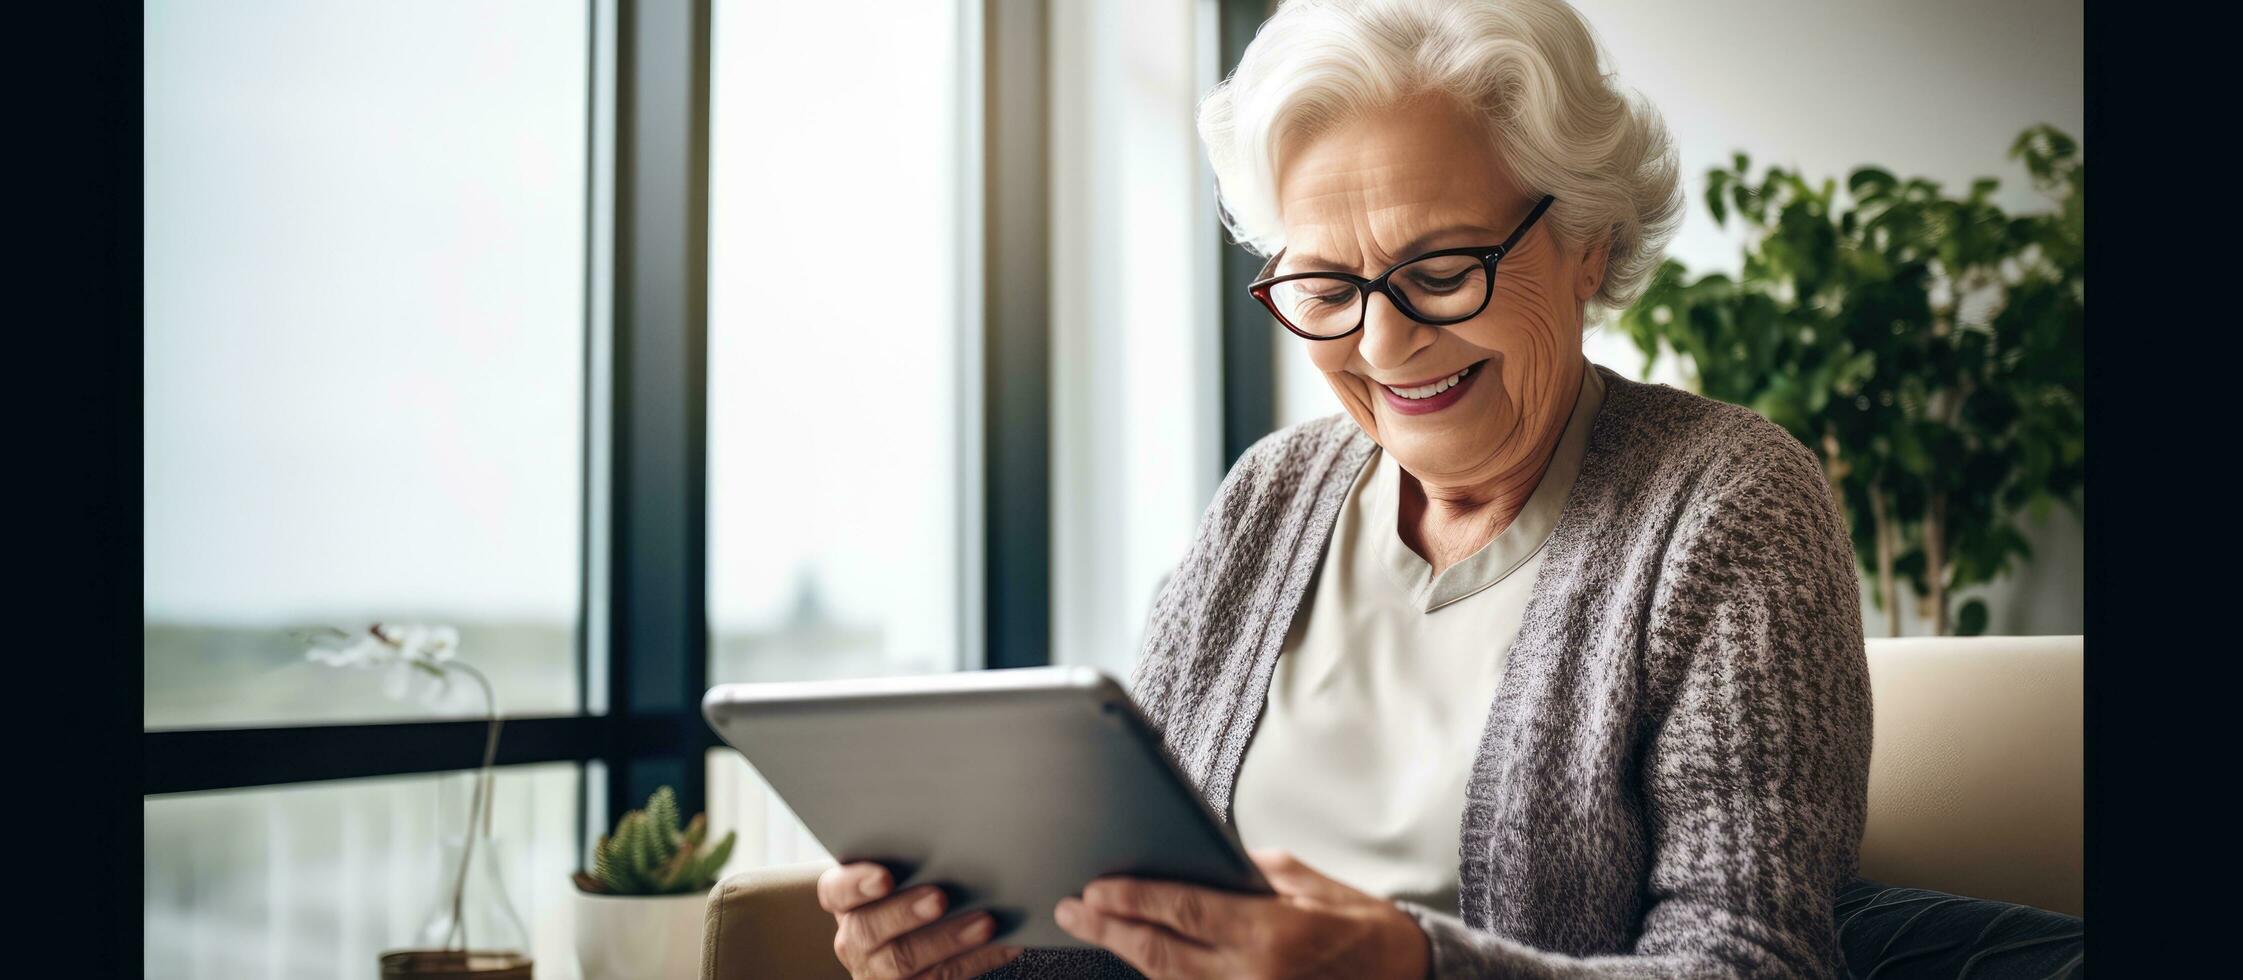 Elderly lady with glasses smiling using a tablet at home browsing internet or watching videos photo